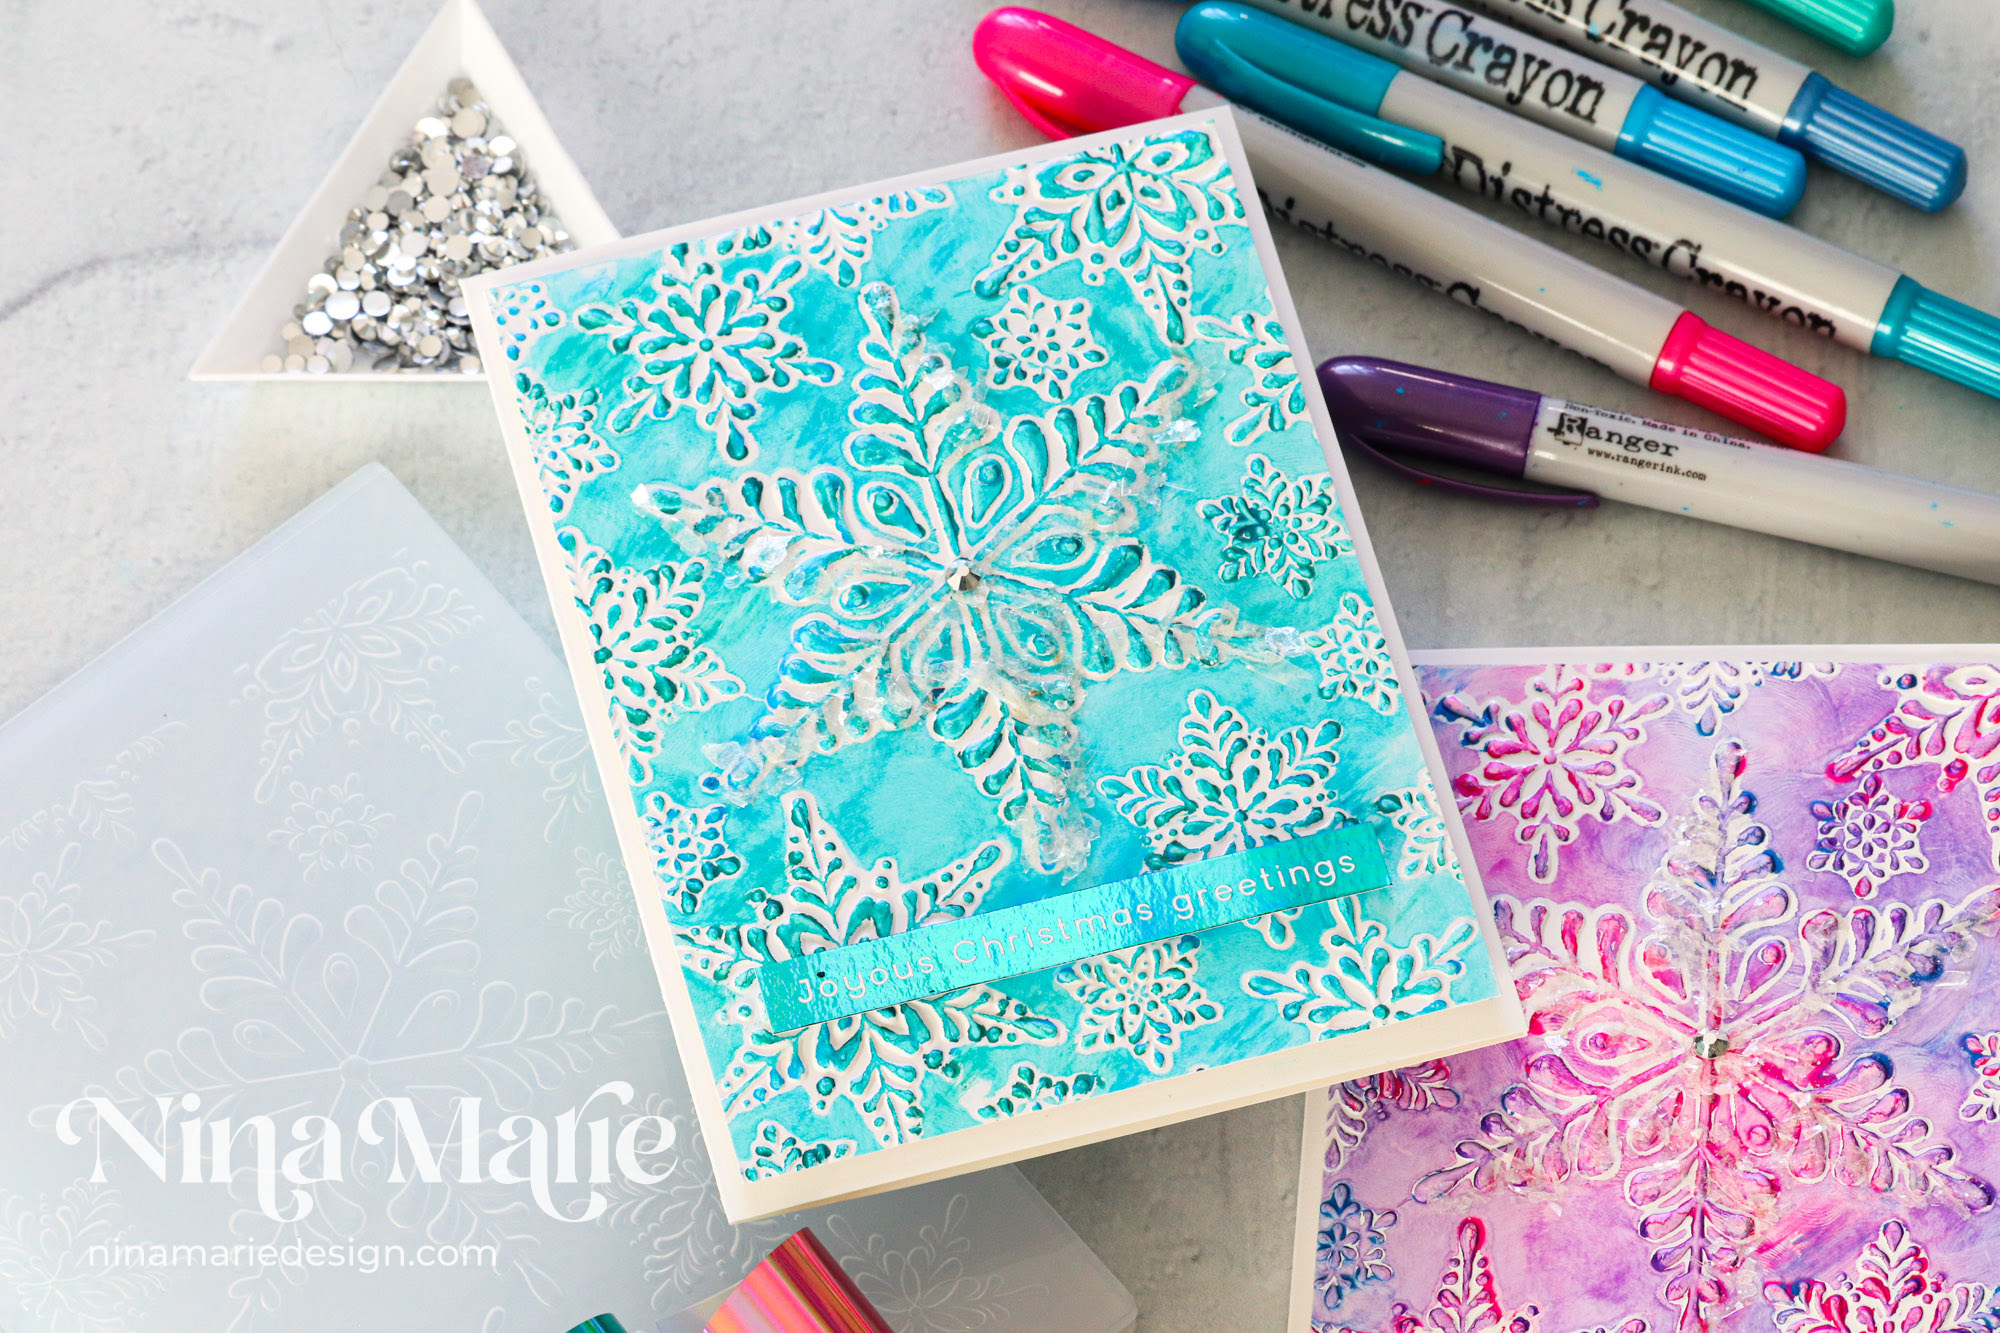 Art Journal play: Tim Holtz Distress Crayons – Craft With May